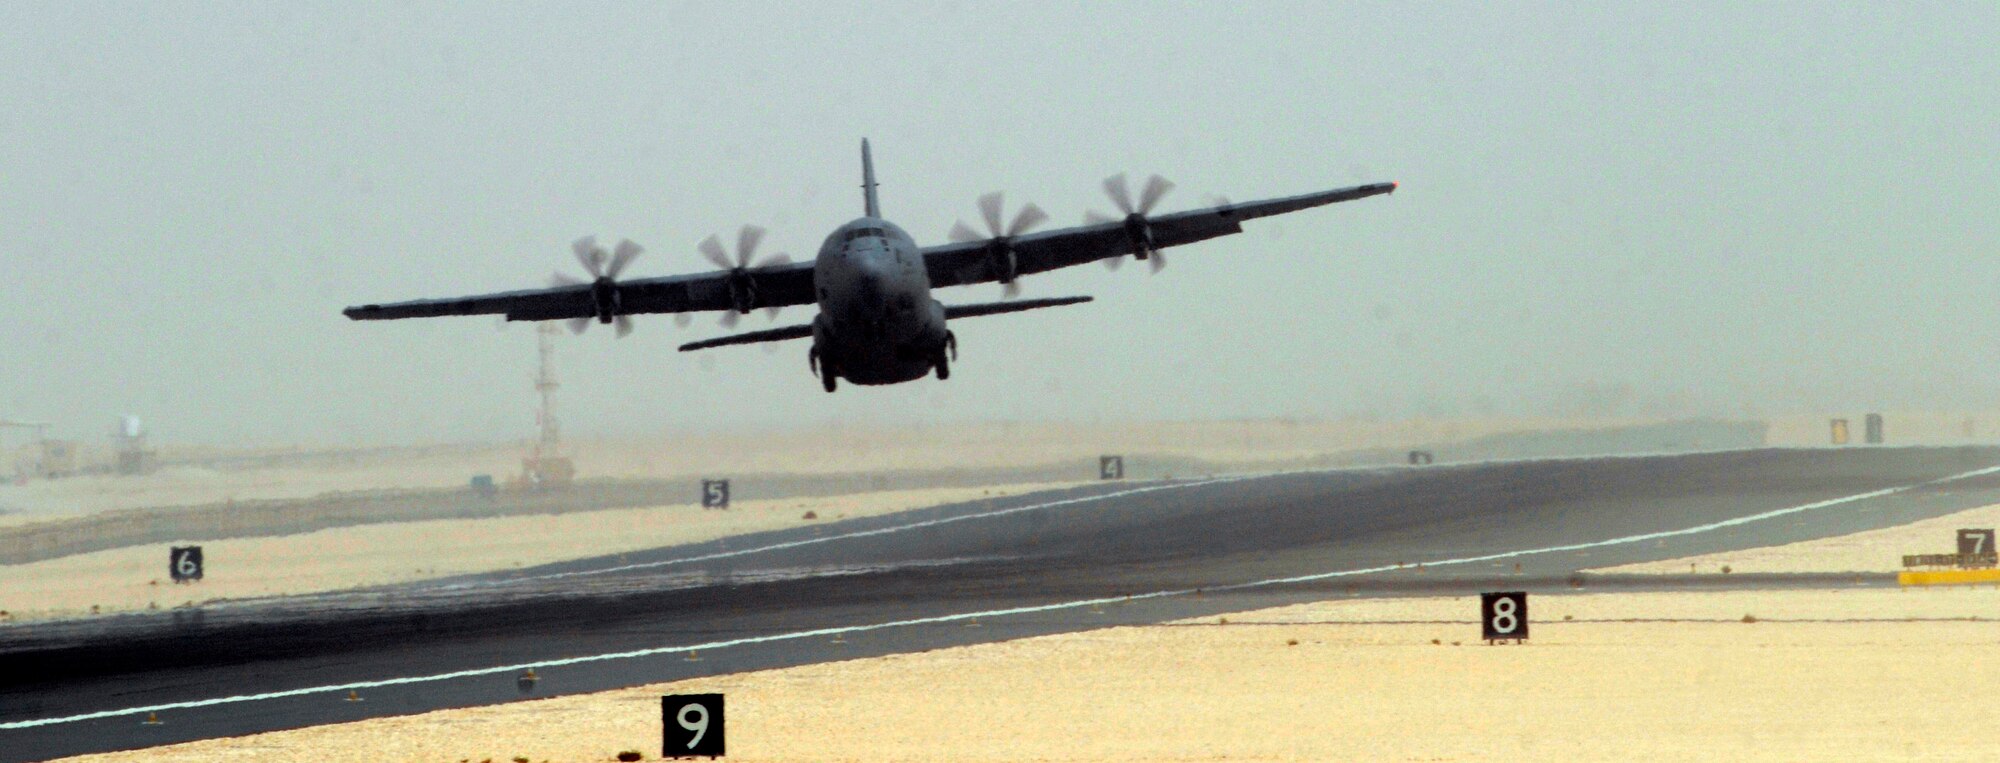 A C-130 Hercules from Youngstown Air Reserve Station, Ohio, fights a cross wind as it starts a mission from an undisclosed air base in Southwest Asia Sep. 2, 2008.  The sand, heat, and wind are all obstacles to be overcome during this deployment.  The C-130 Hercules primarily performs the tactical portion of the airlift mission. The aircraft is capable of operating from rough, dirt strips and is the prime transport for air dropping troops and equipment into hostile areas. The C-130 operates throughout the U.S. Air Force and is here in support of Operations Iraqi and Enduring Freedom and Joint Task Force-Horn of Africa.  (U.S. Air Force photo by Tech. Sgt. Michael Boquette/Released)